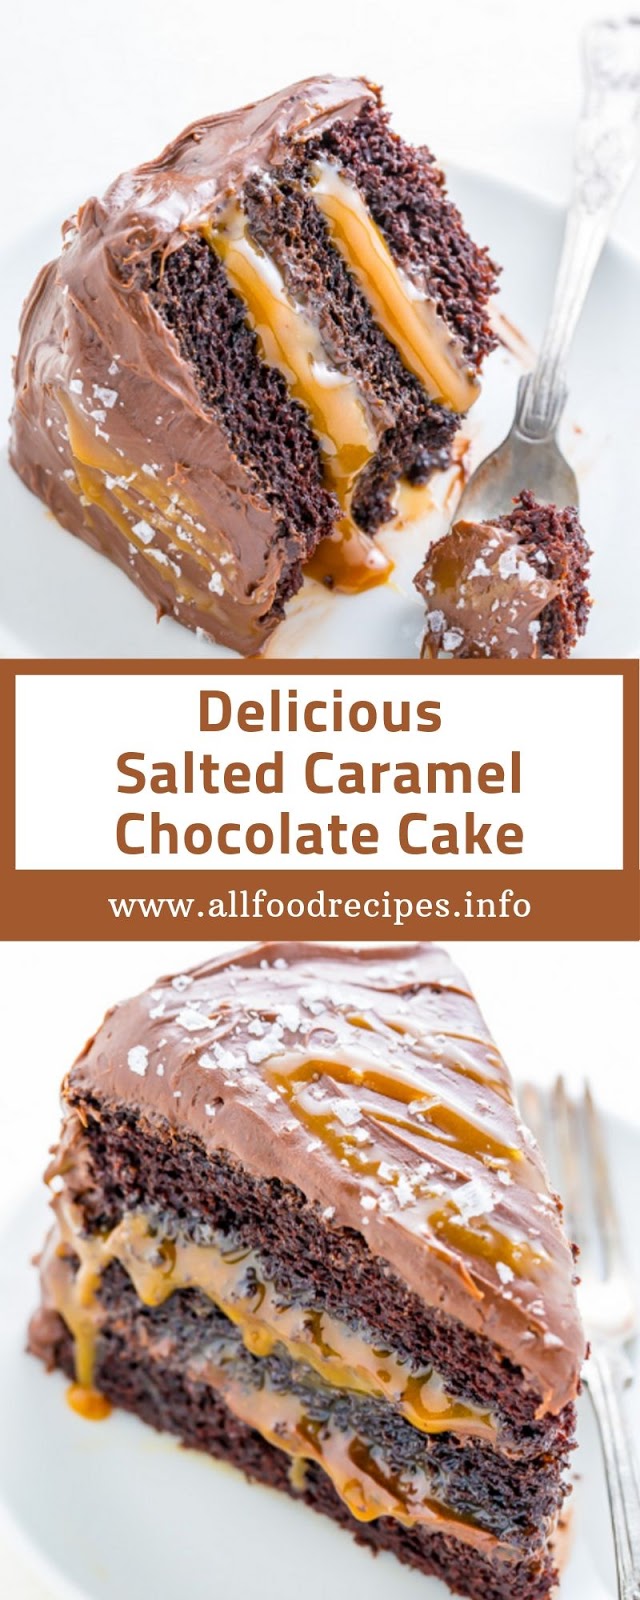 Delicious Salted Caramel Chocolate Cake